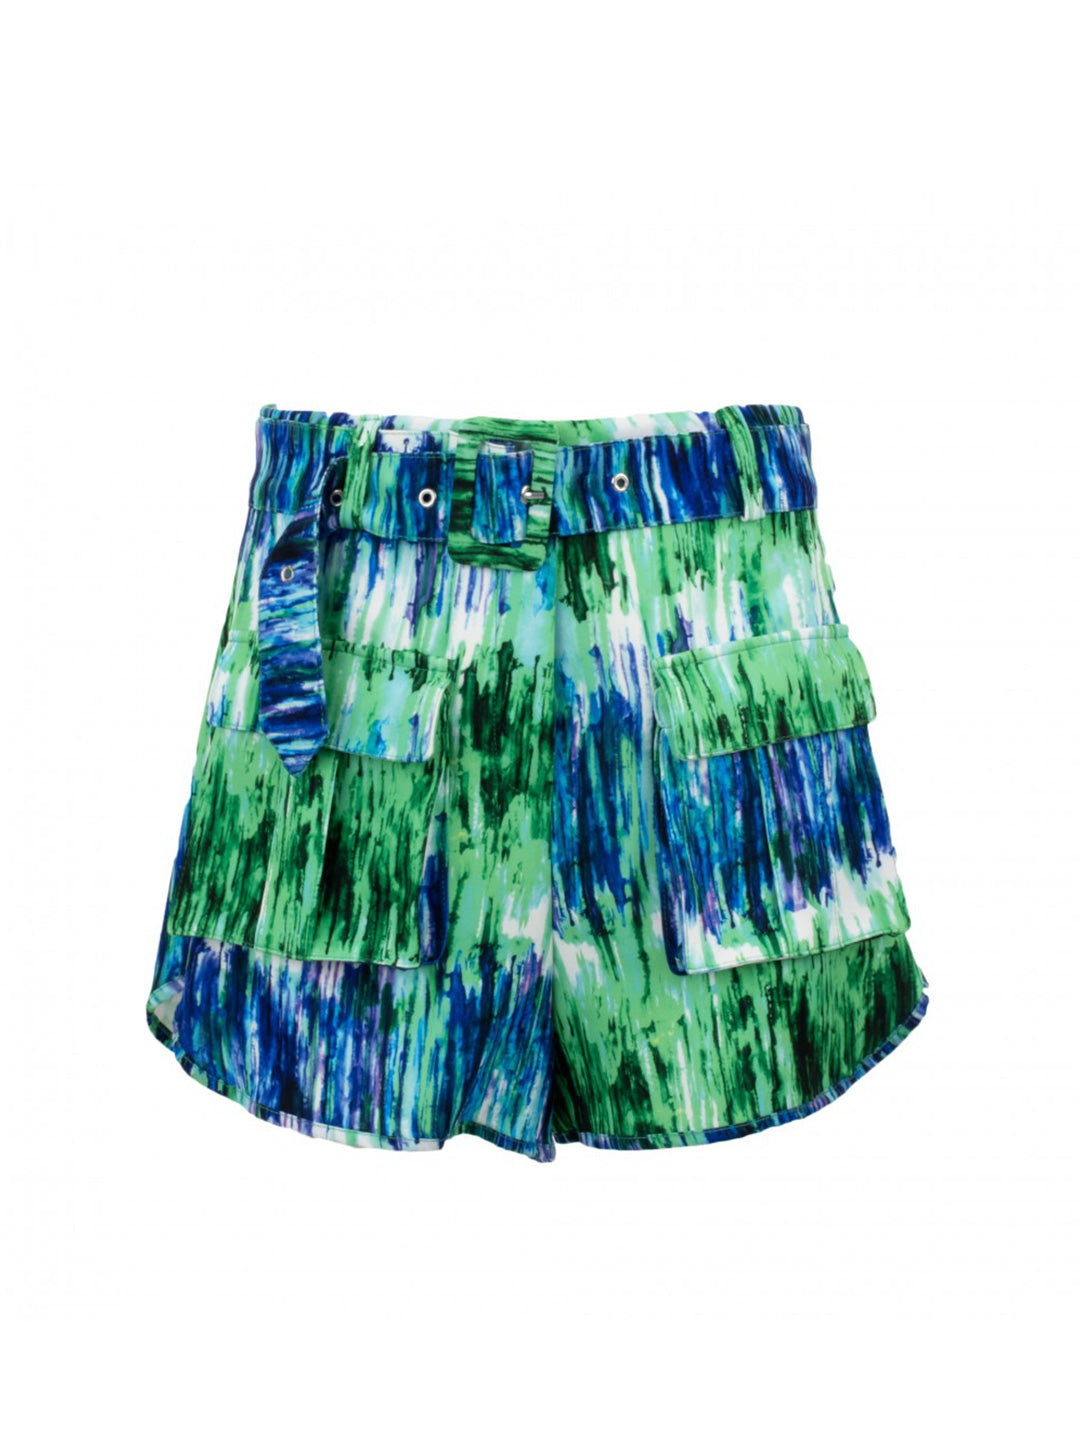 TPN Ernestine green patterned shorts with tie dye print